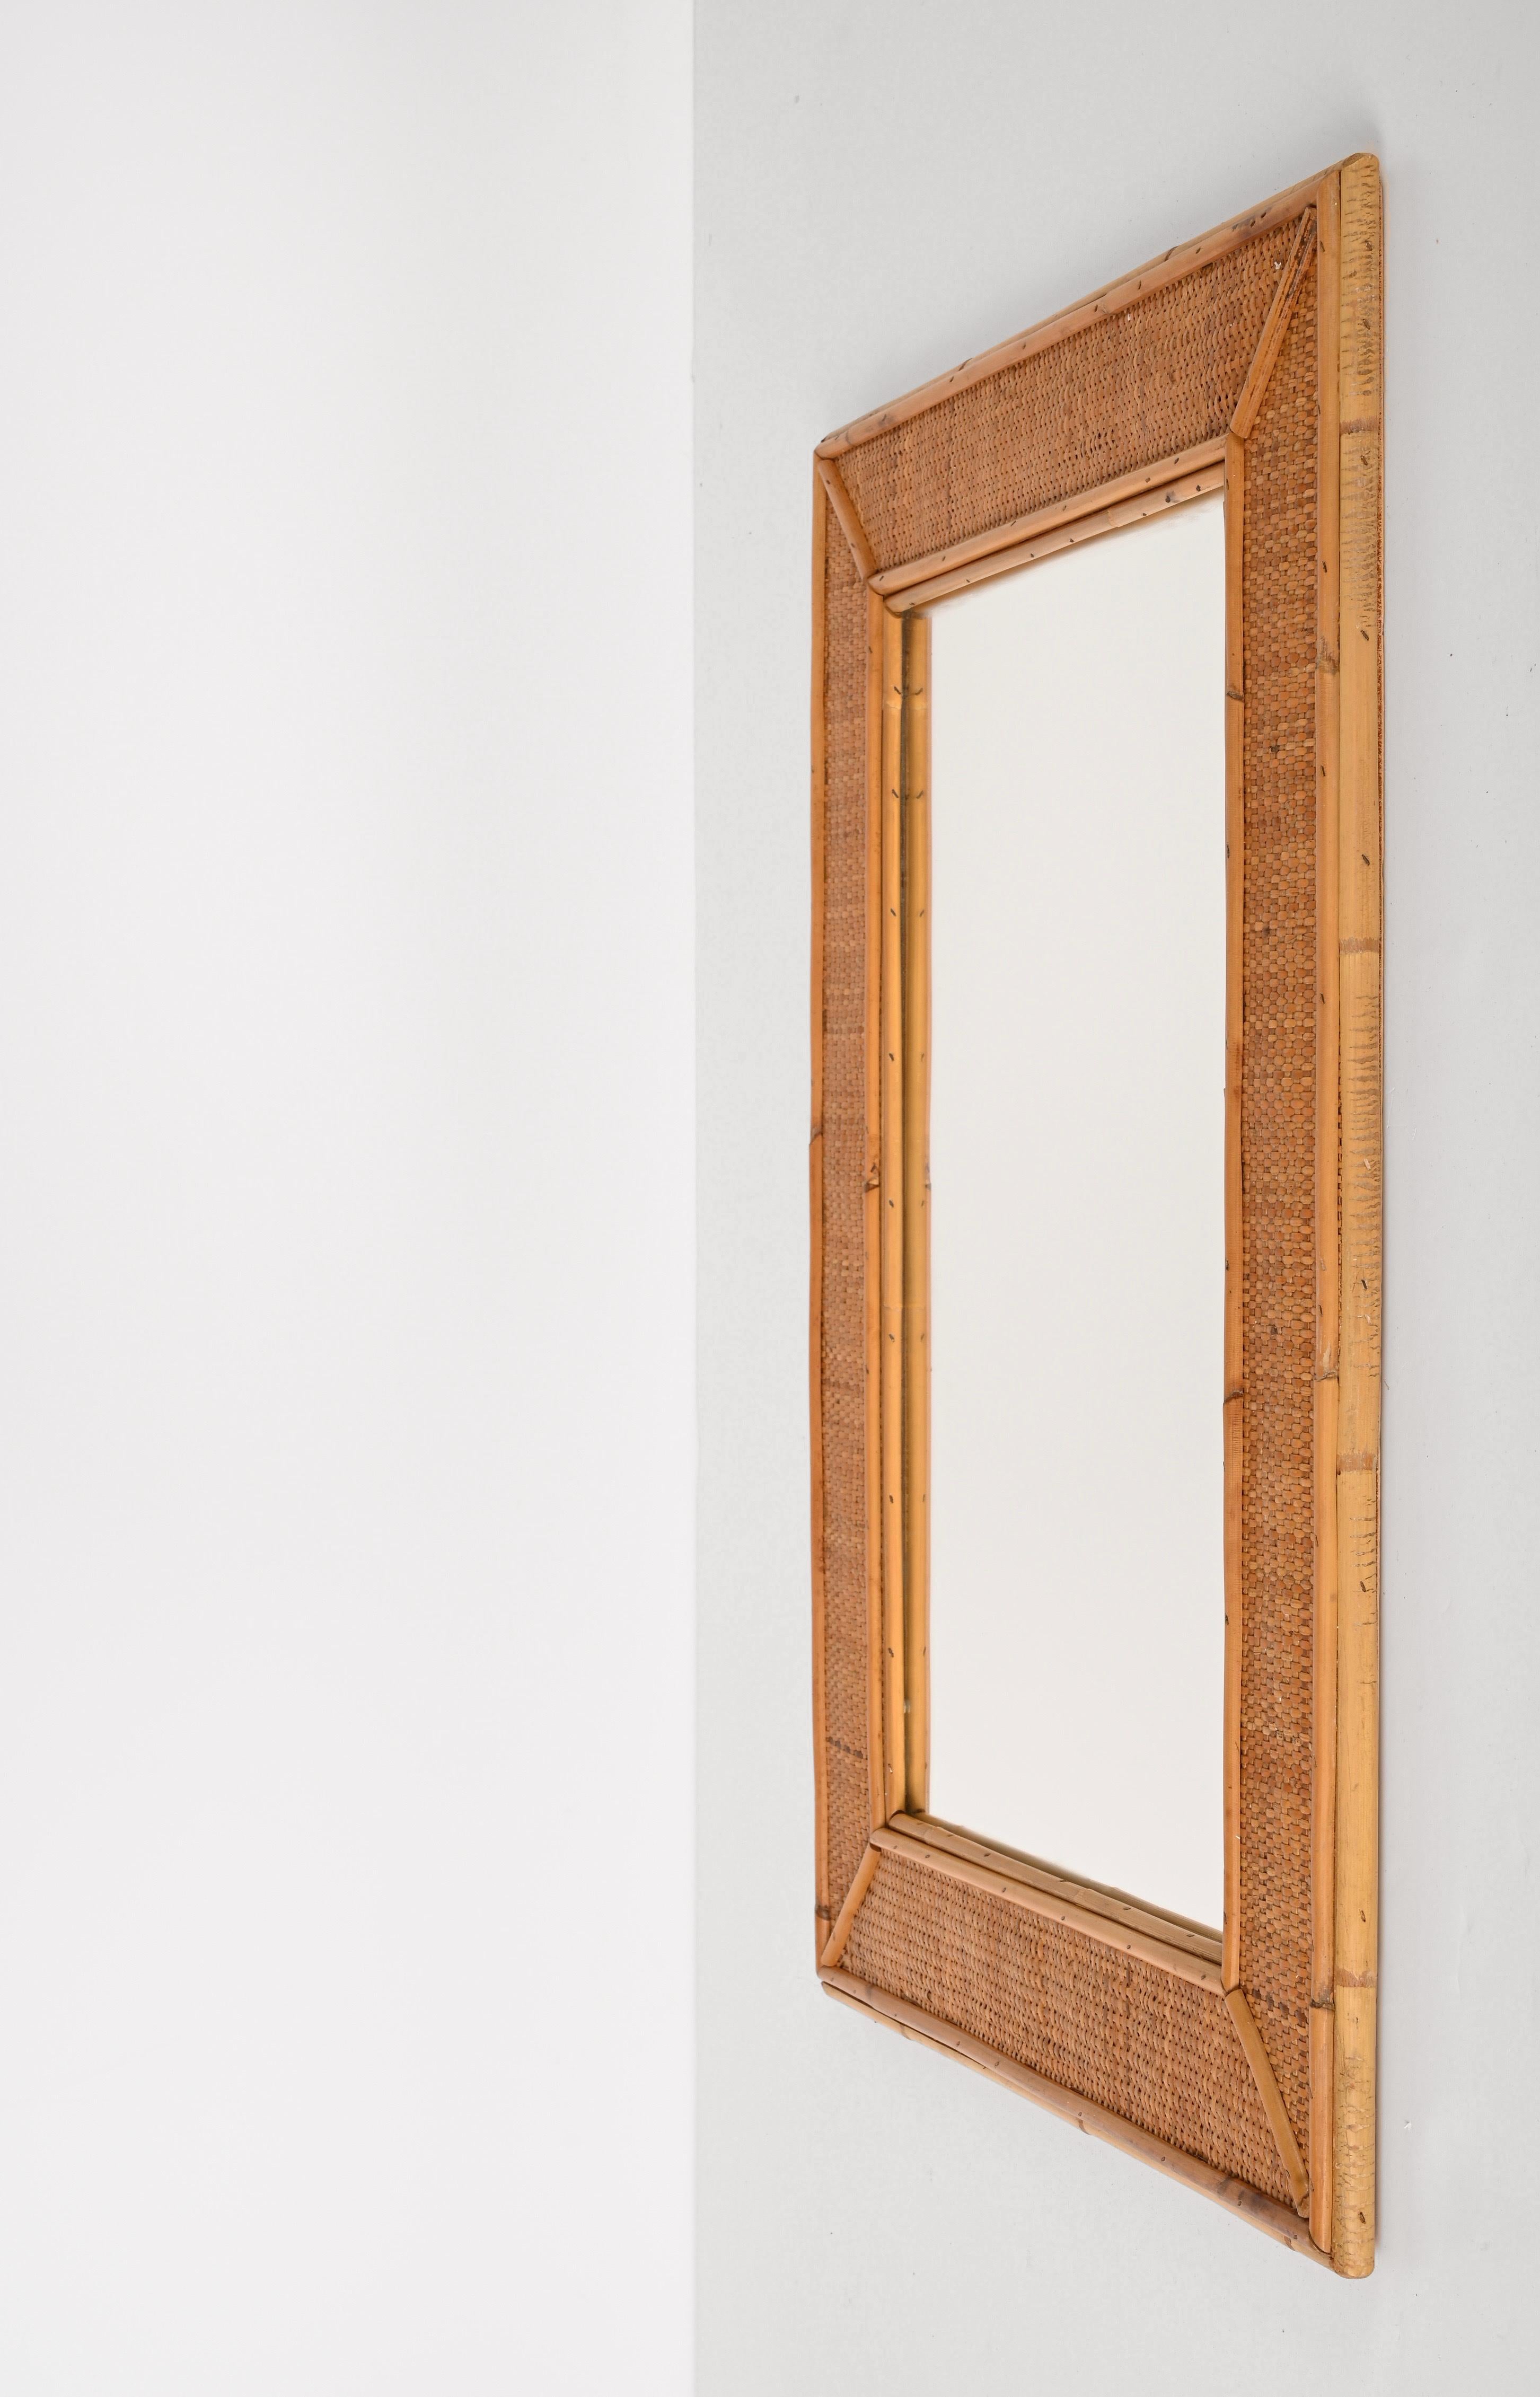 Midcentury Rectangular Italian Mirror with Bamboo and Woven Wicker Frame, 1970s For Sale 2